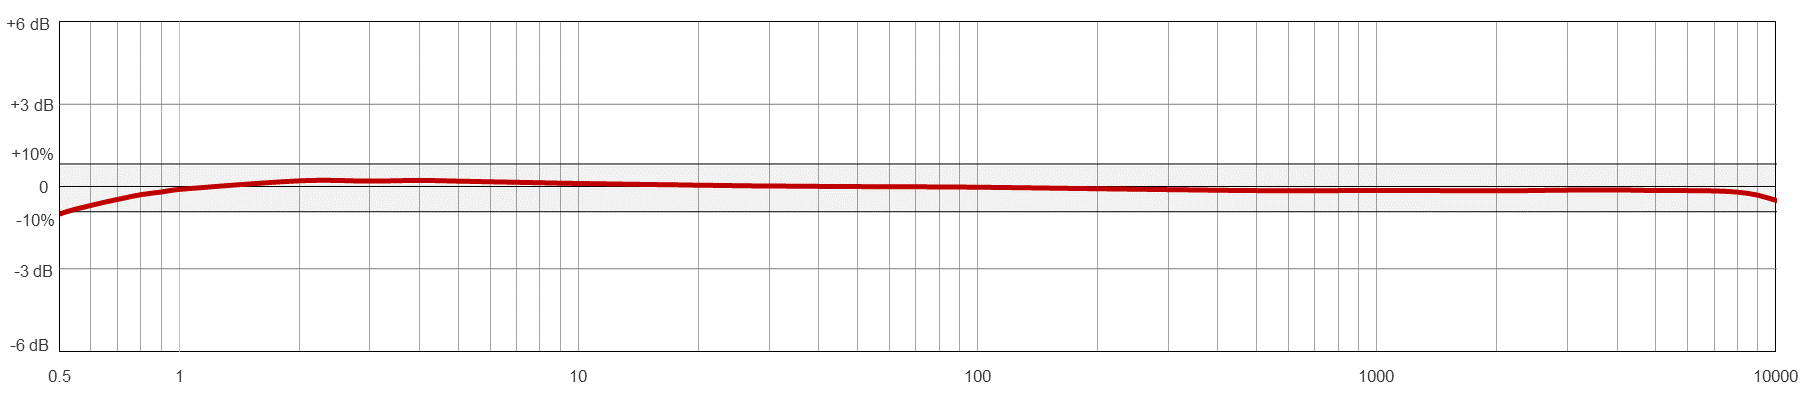 AC211TYPICAL FREQUENCY RESPONSE